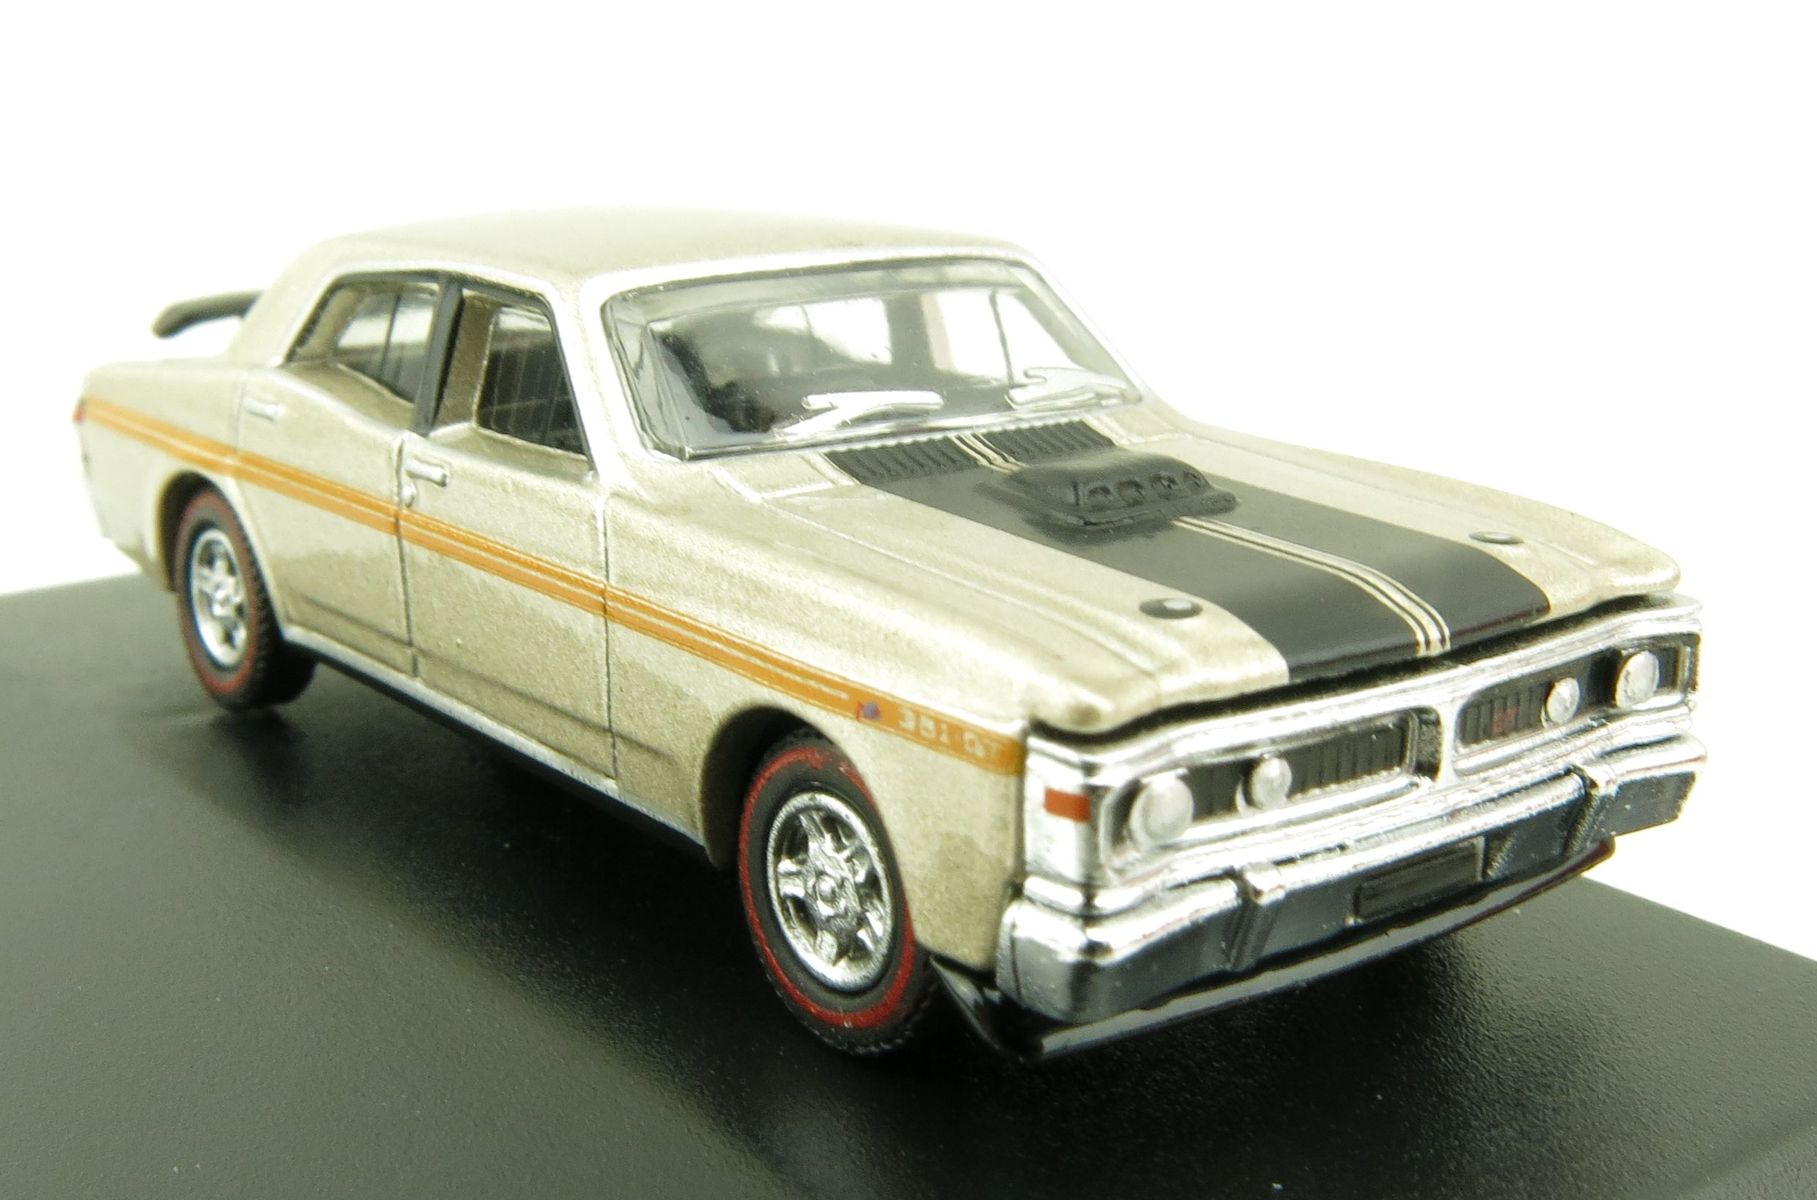 Product Image - Road Ragers Australian 1971 Ford Falcon XY 351 GTHO Muscle Car in Quicksilver in H0 Scale 1:87